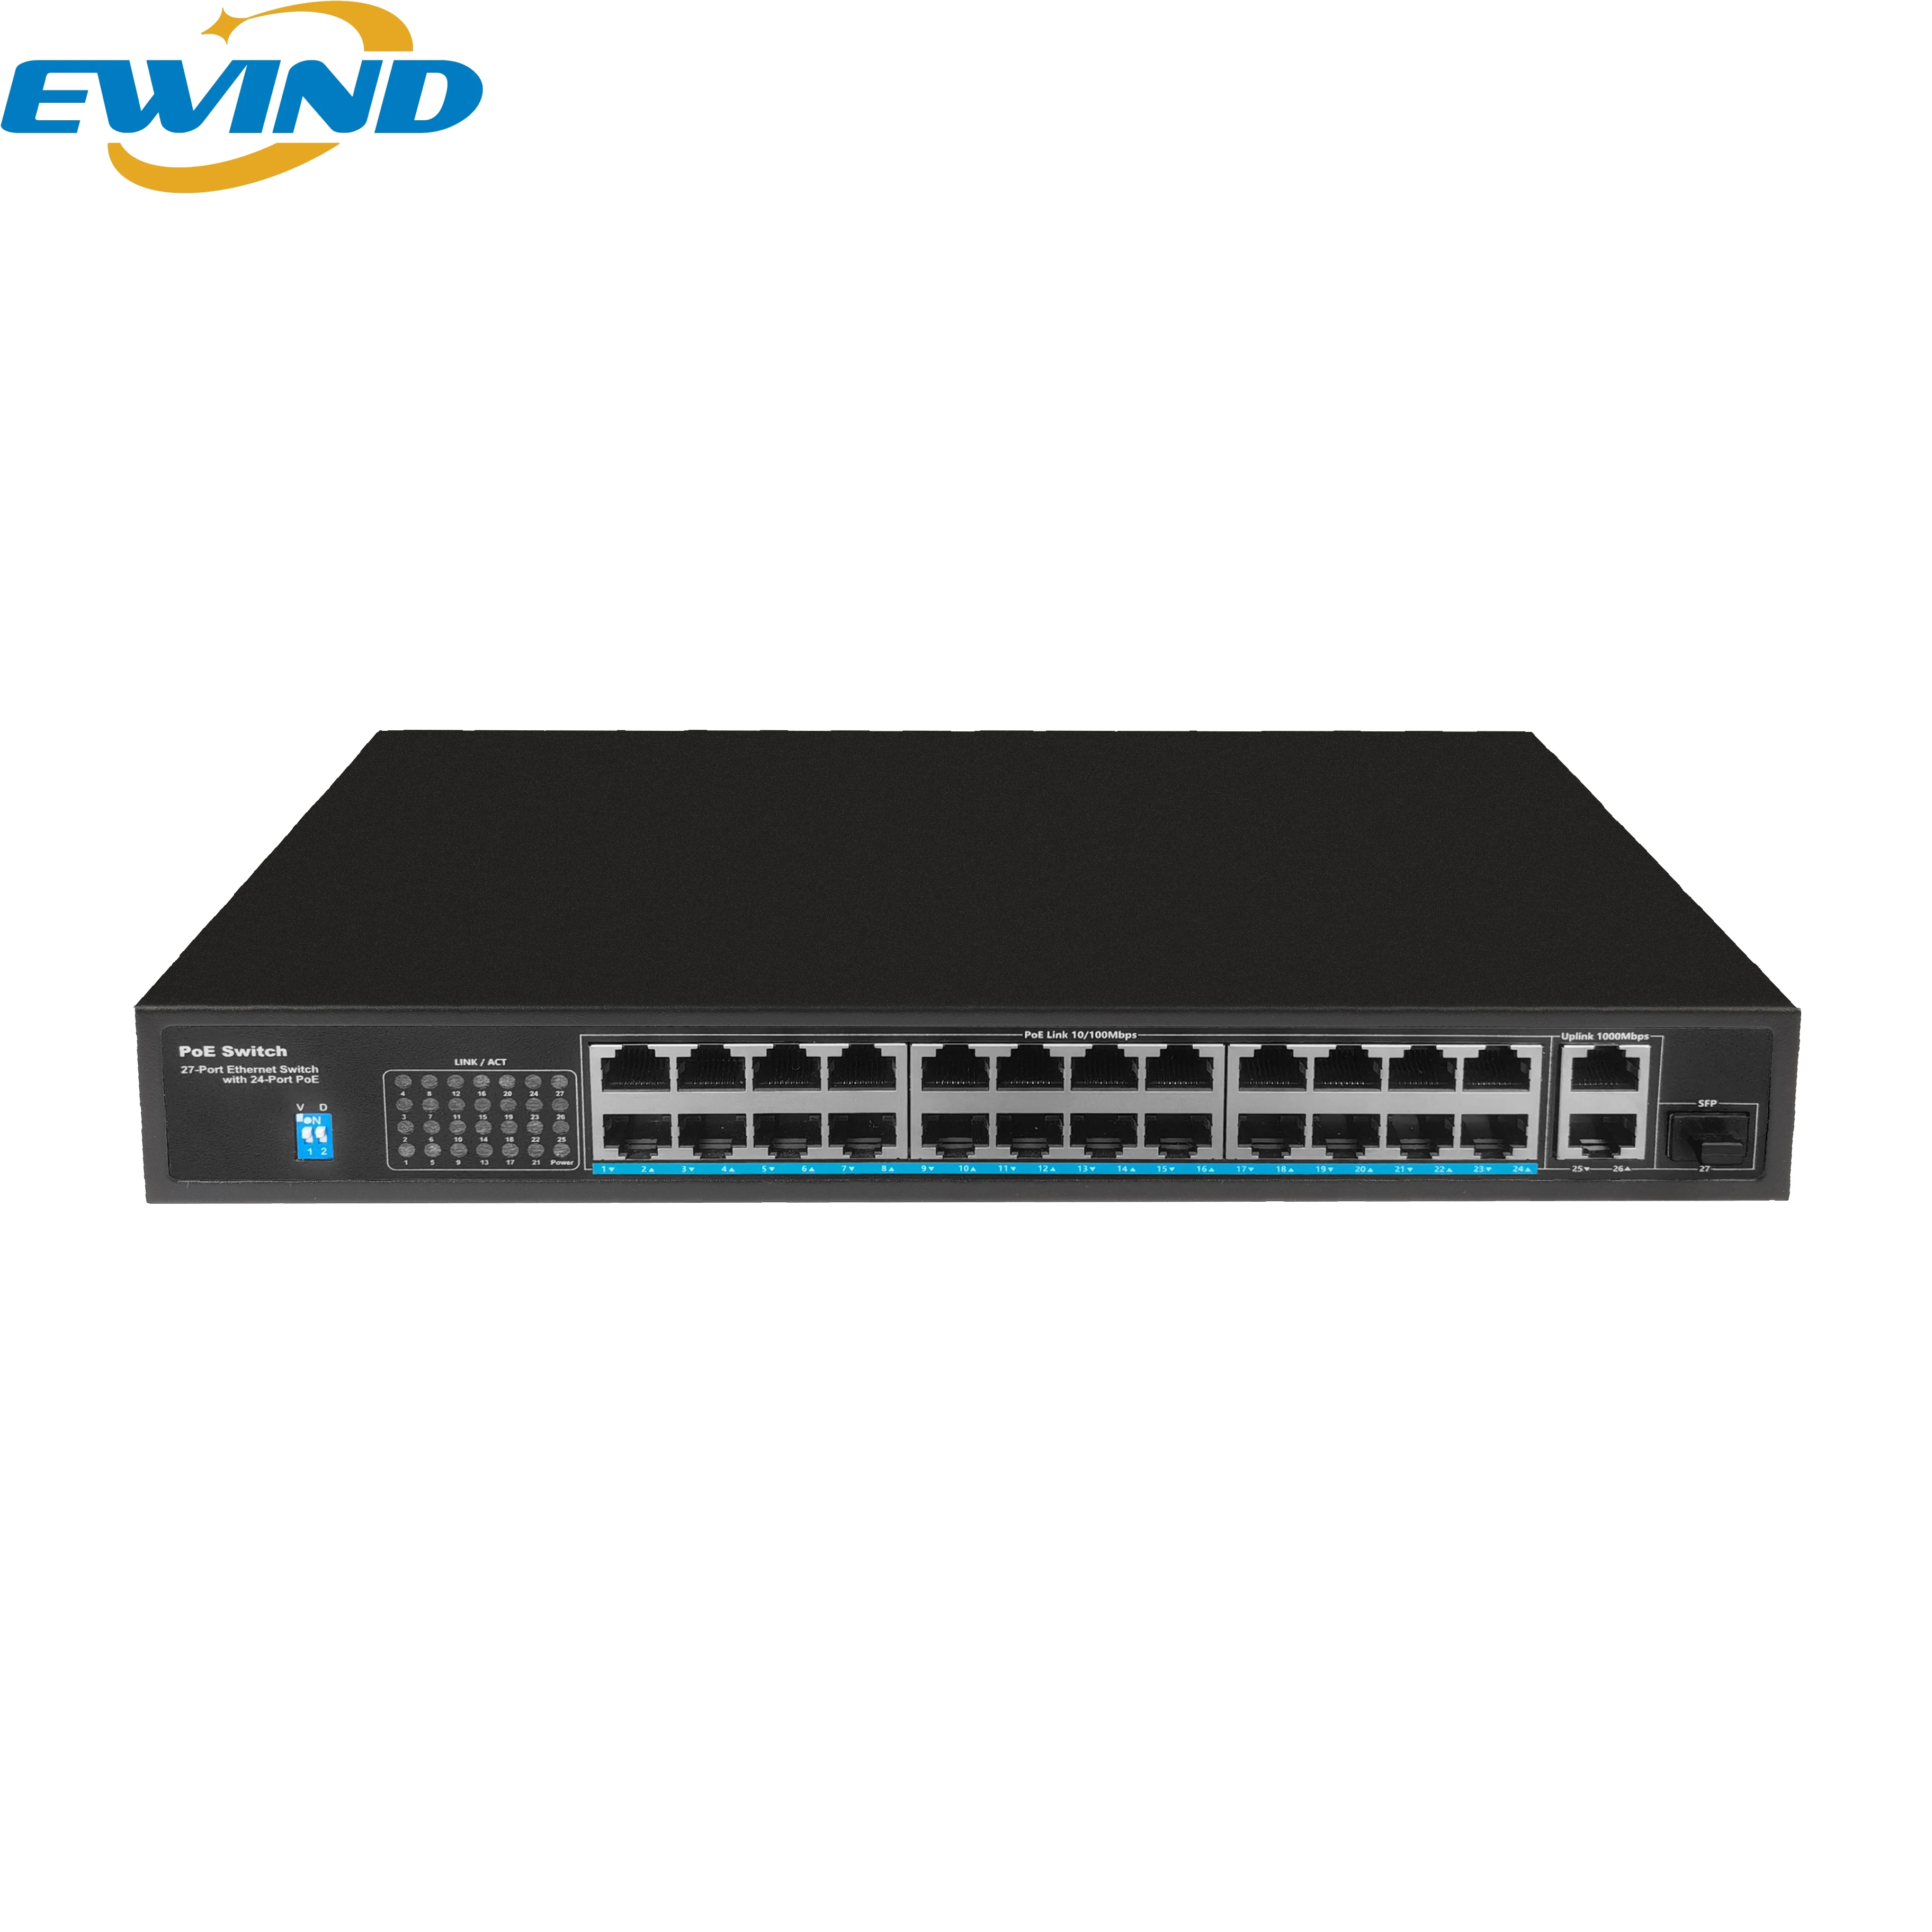 EWIND 27 Port POE Switch with 2 10/100/1000M RJ45 Port and 1 Gigabit SFP Slot AI Smart Network Switch for IP Camera/Wireless AP